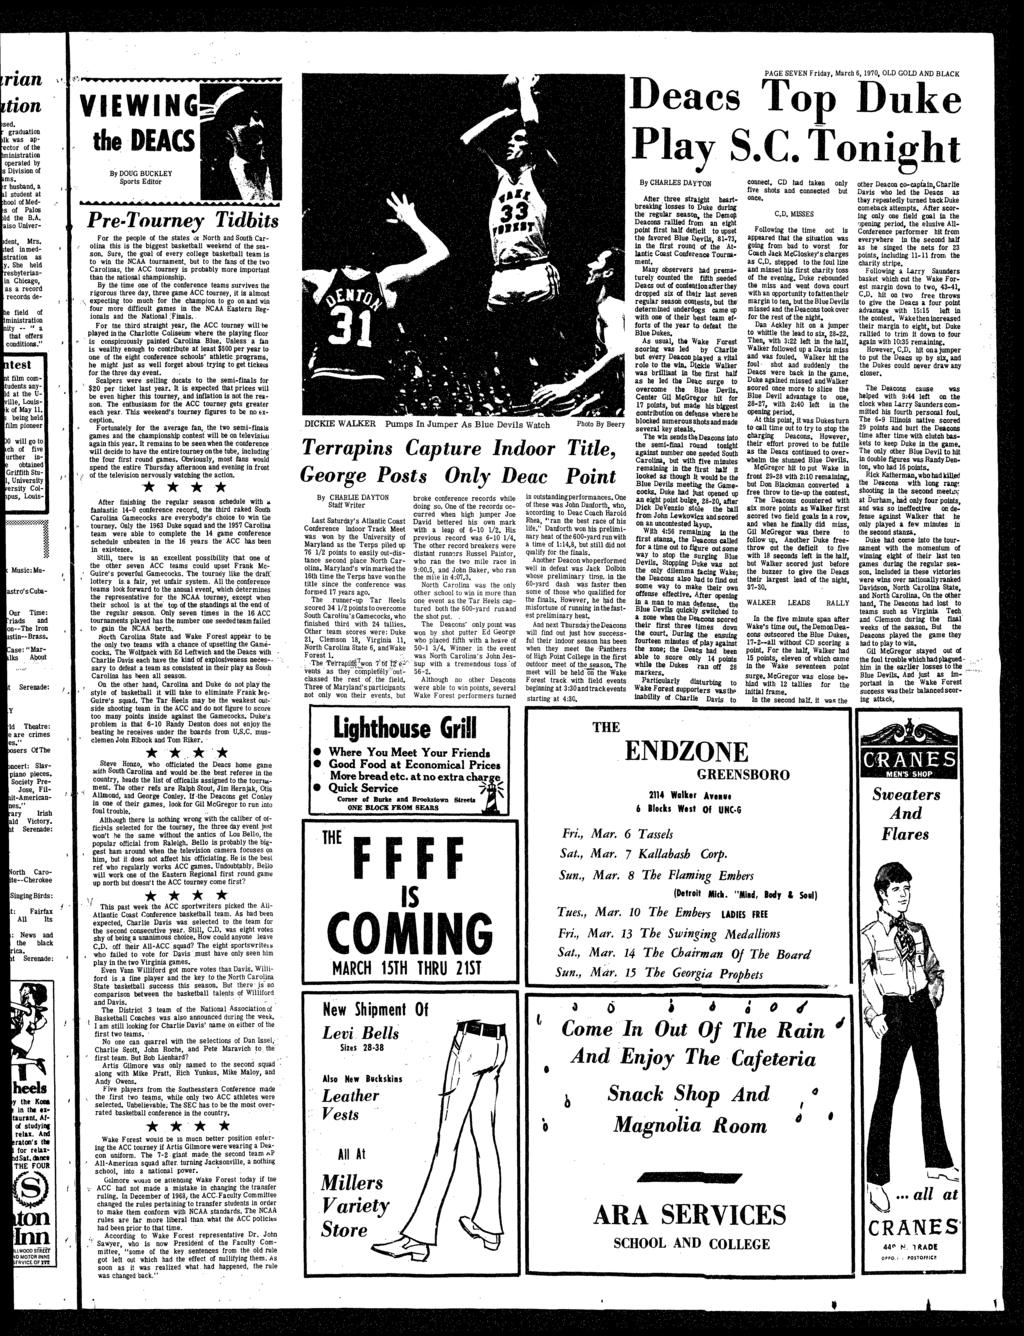 rzan t"ton VEWNG the DEACS PAGE SEVEN Frday, March 6, 197, OLD GOLD AND BLACK Deacs Top Duke Play S.C. Tonght MuscMu- "Mar Apo!lt Serenade Theatre crmes Slav- rsh Vctory. Serenade Farfax All ts.